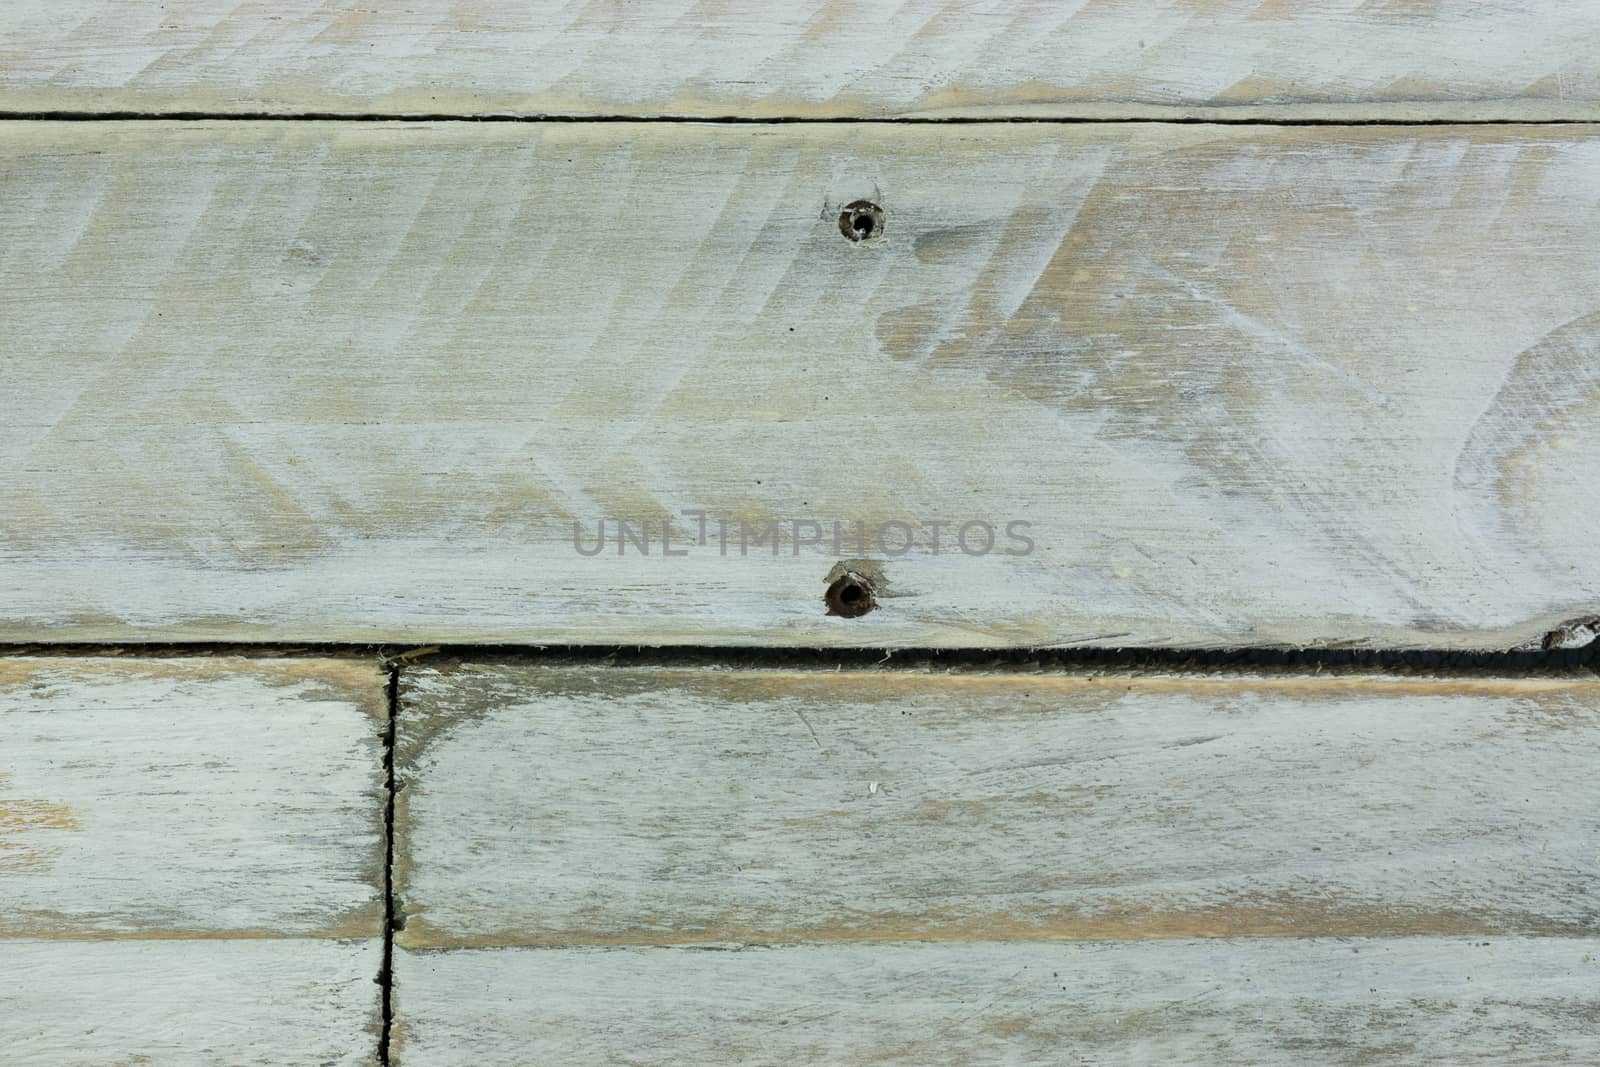 Old wooden planks painted white and distressed